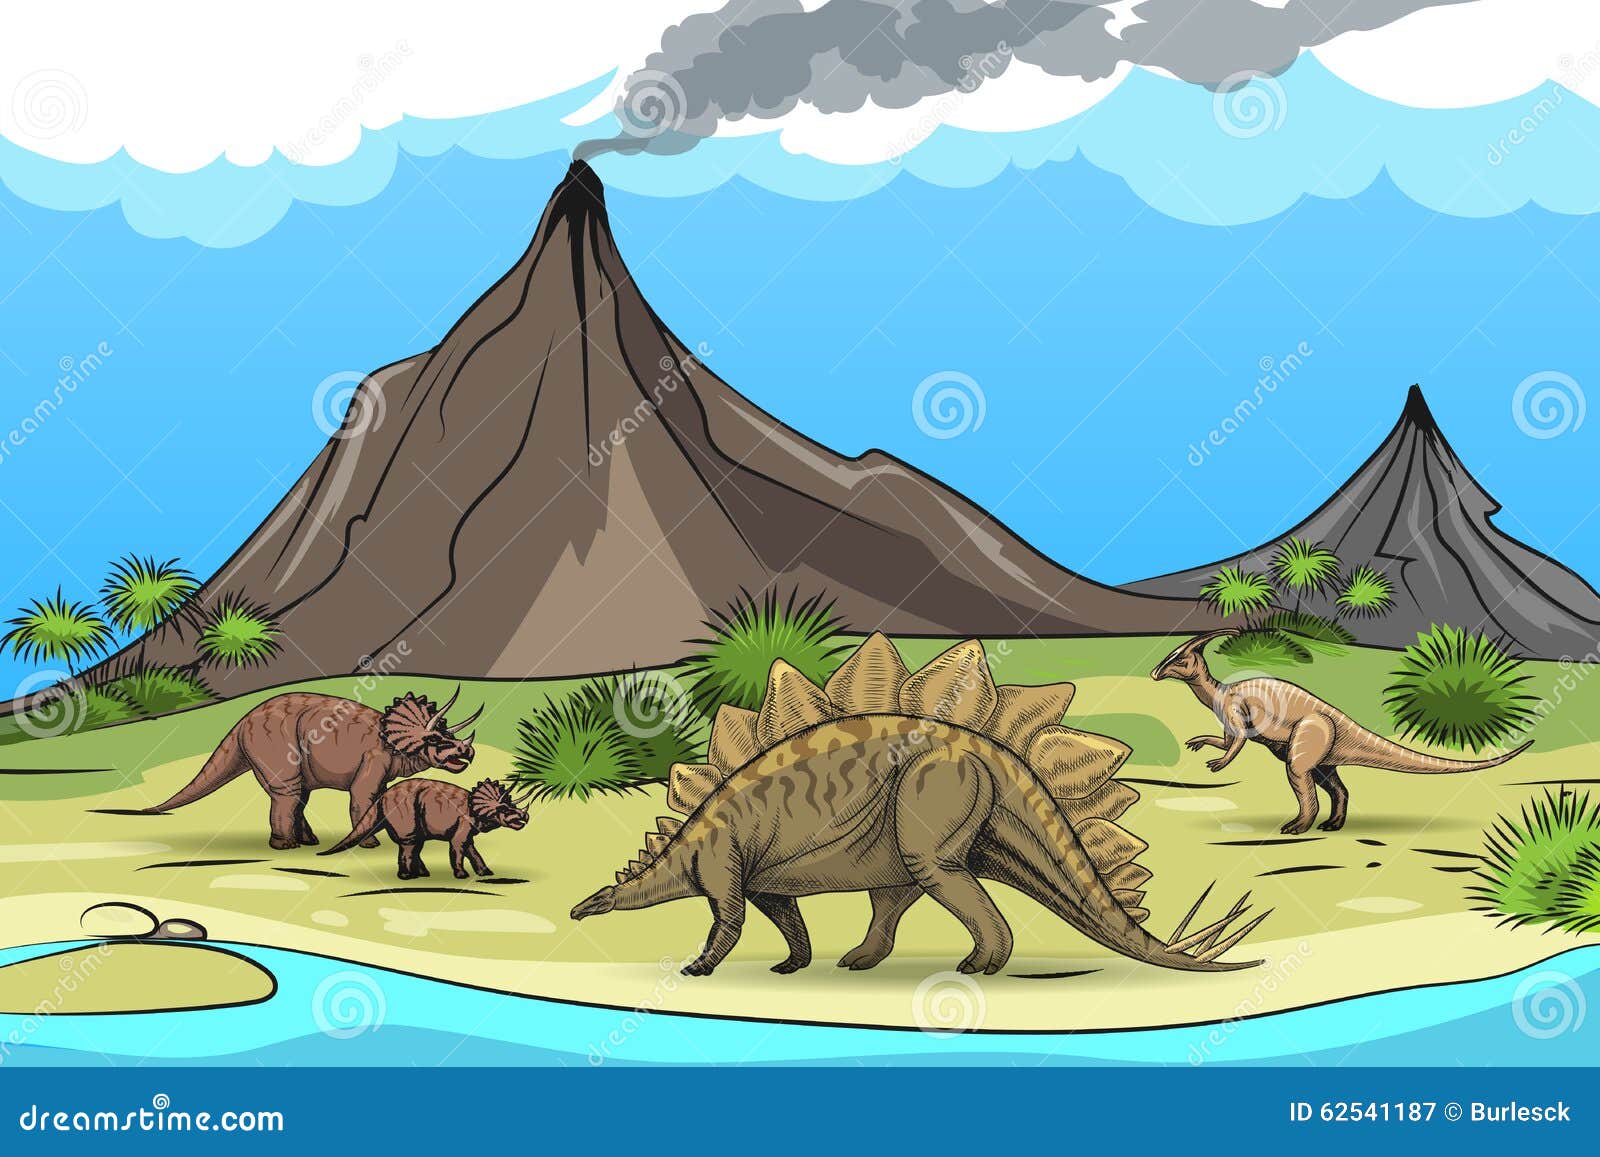 prehistory with dinosaurs and volcano